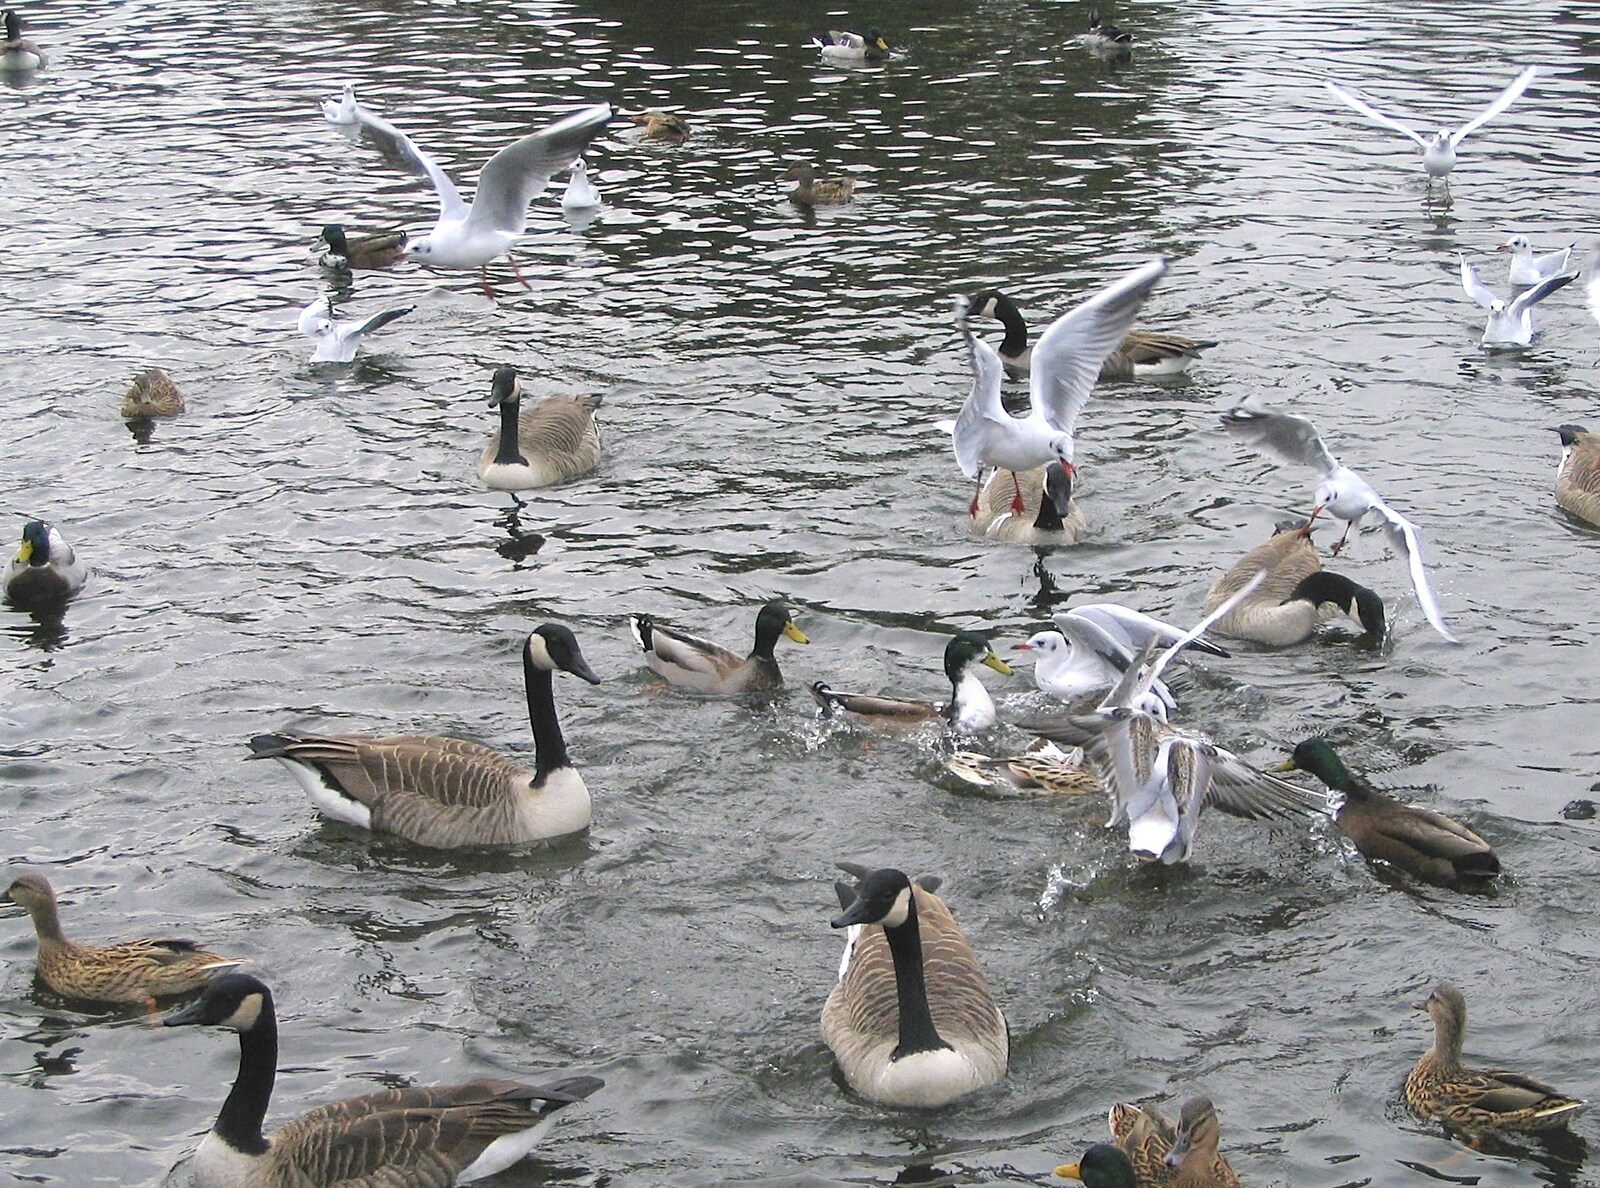 Geese and seagulls do a face-off from Feeding the Ducks: a Diss and Norwich Miscellany - 7th November 2004